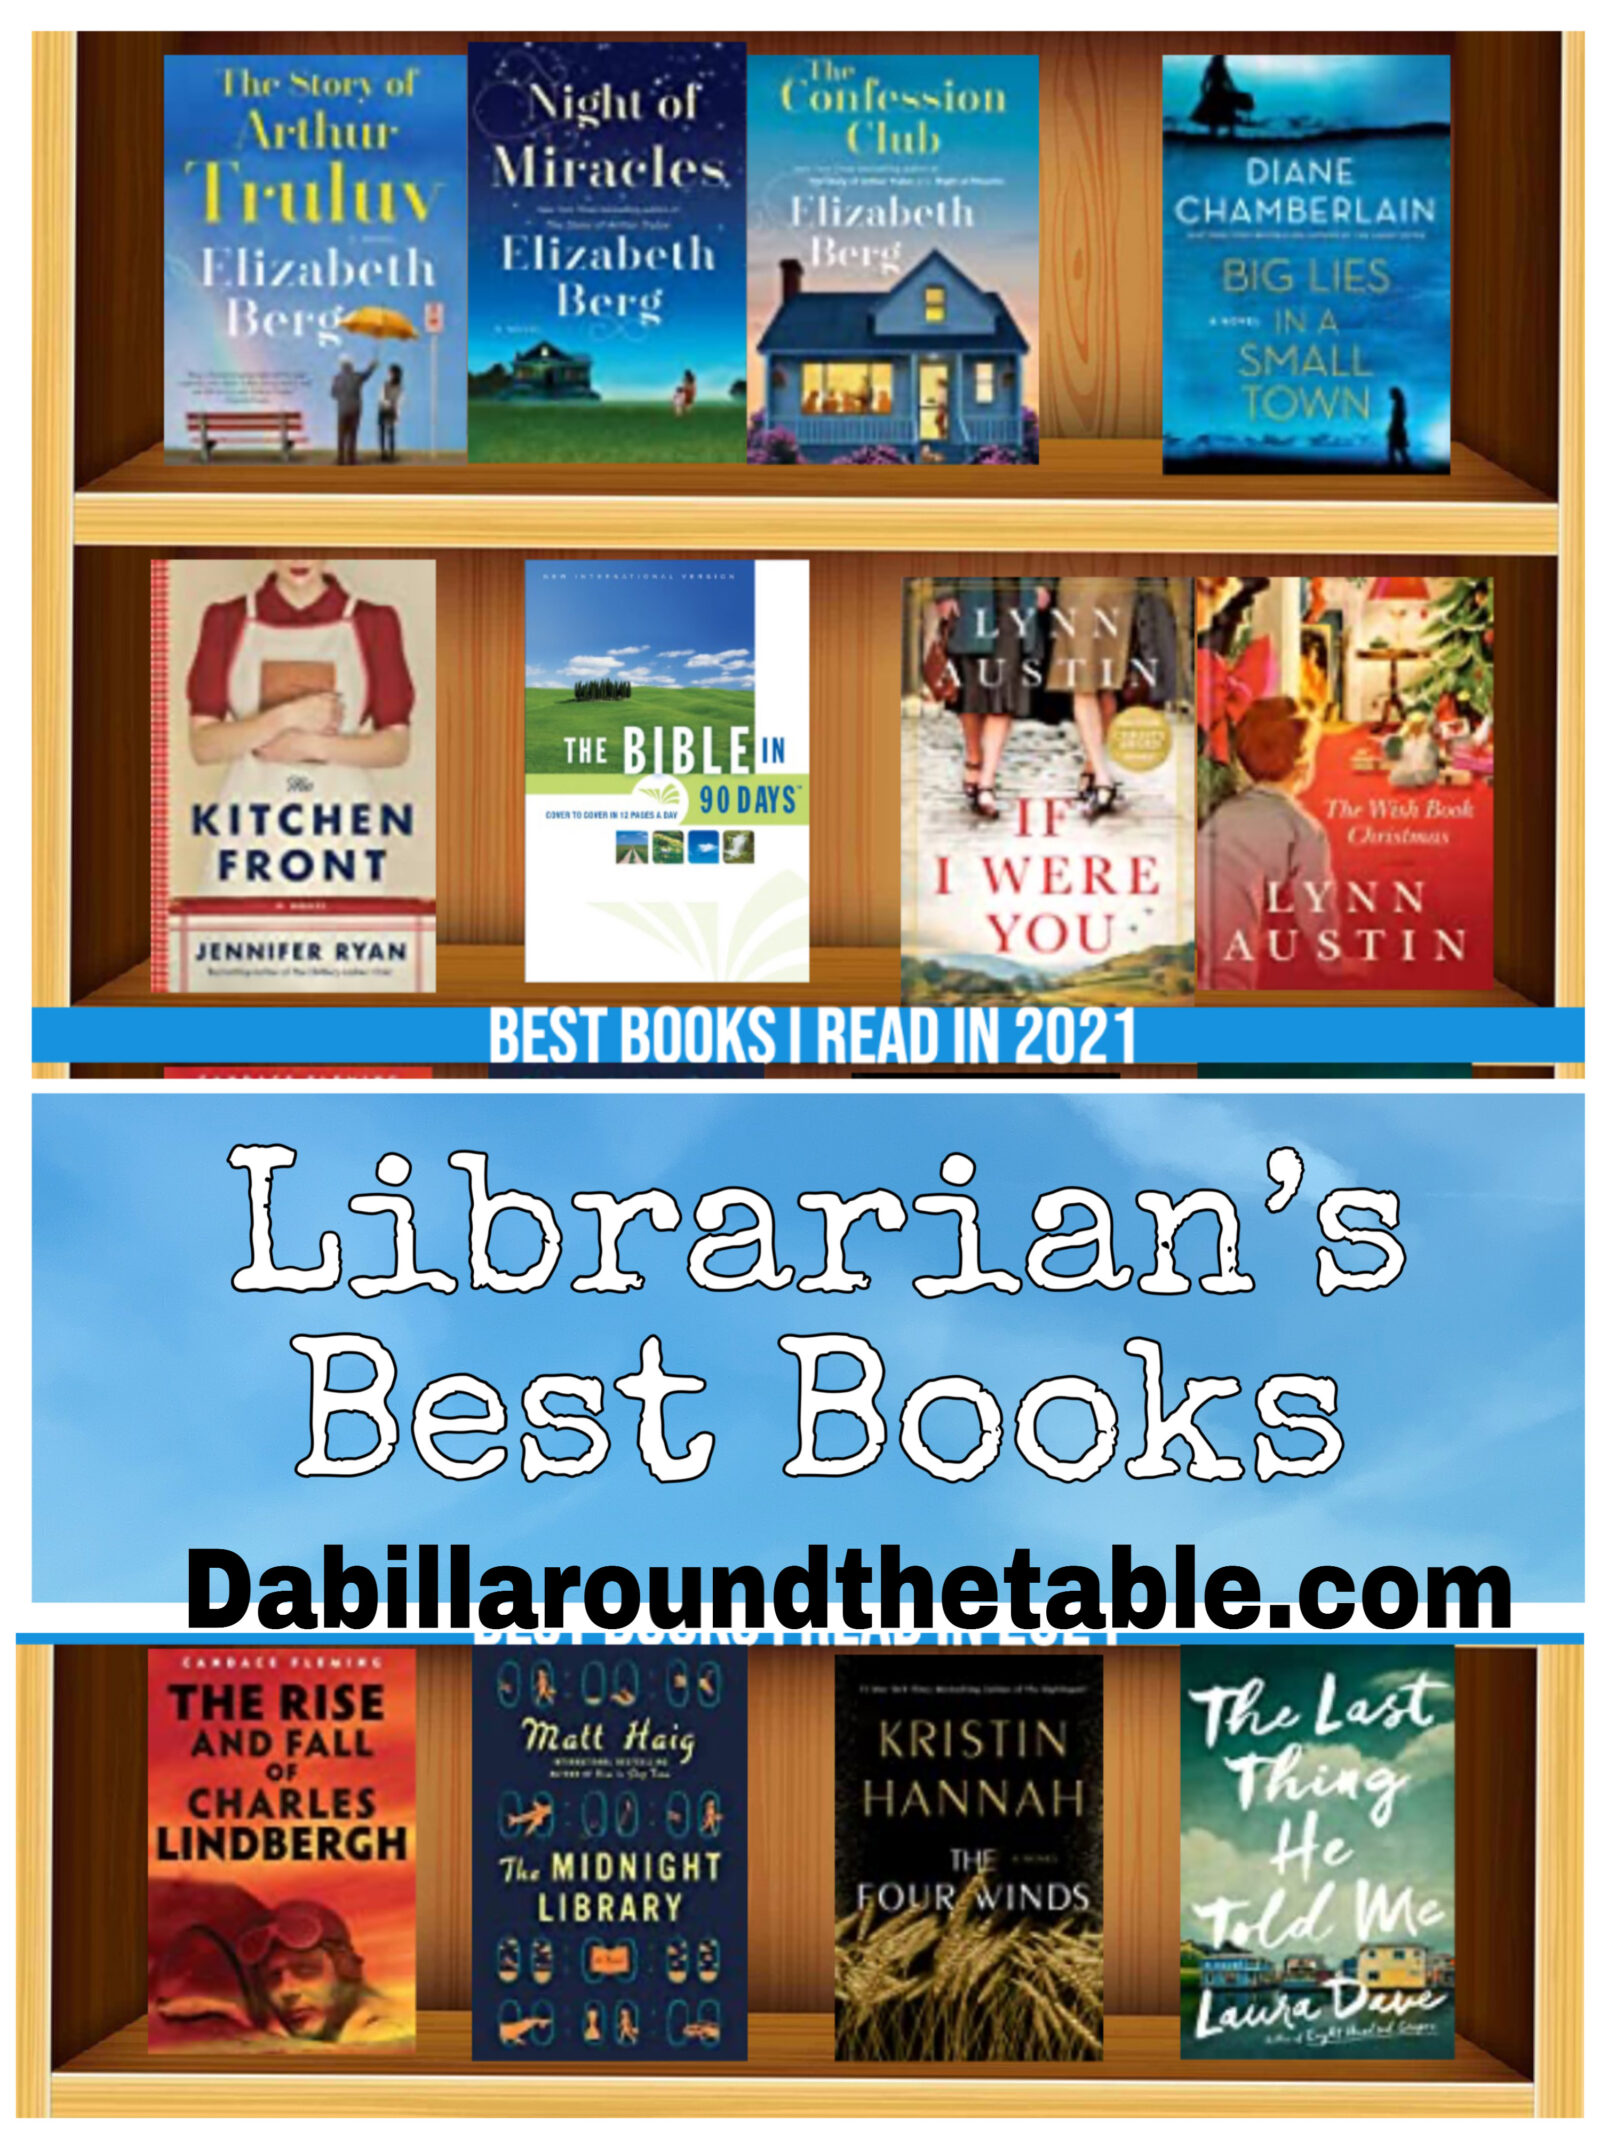 Librarian's Best Books in 2021